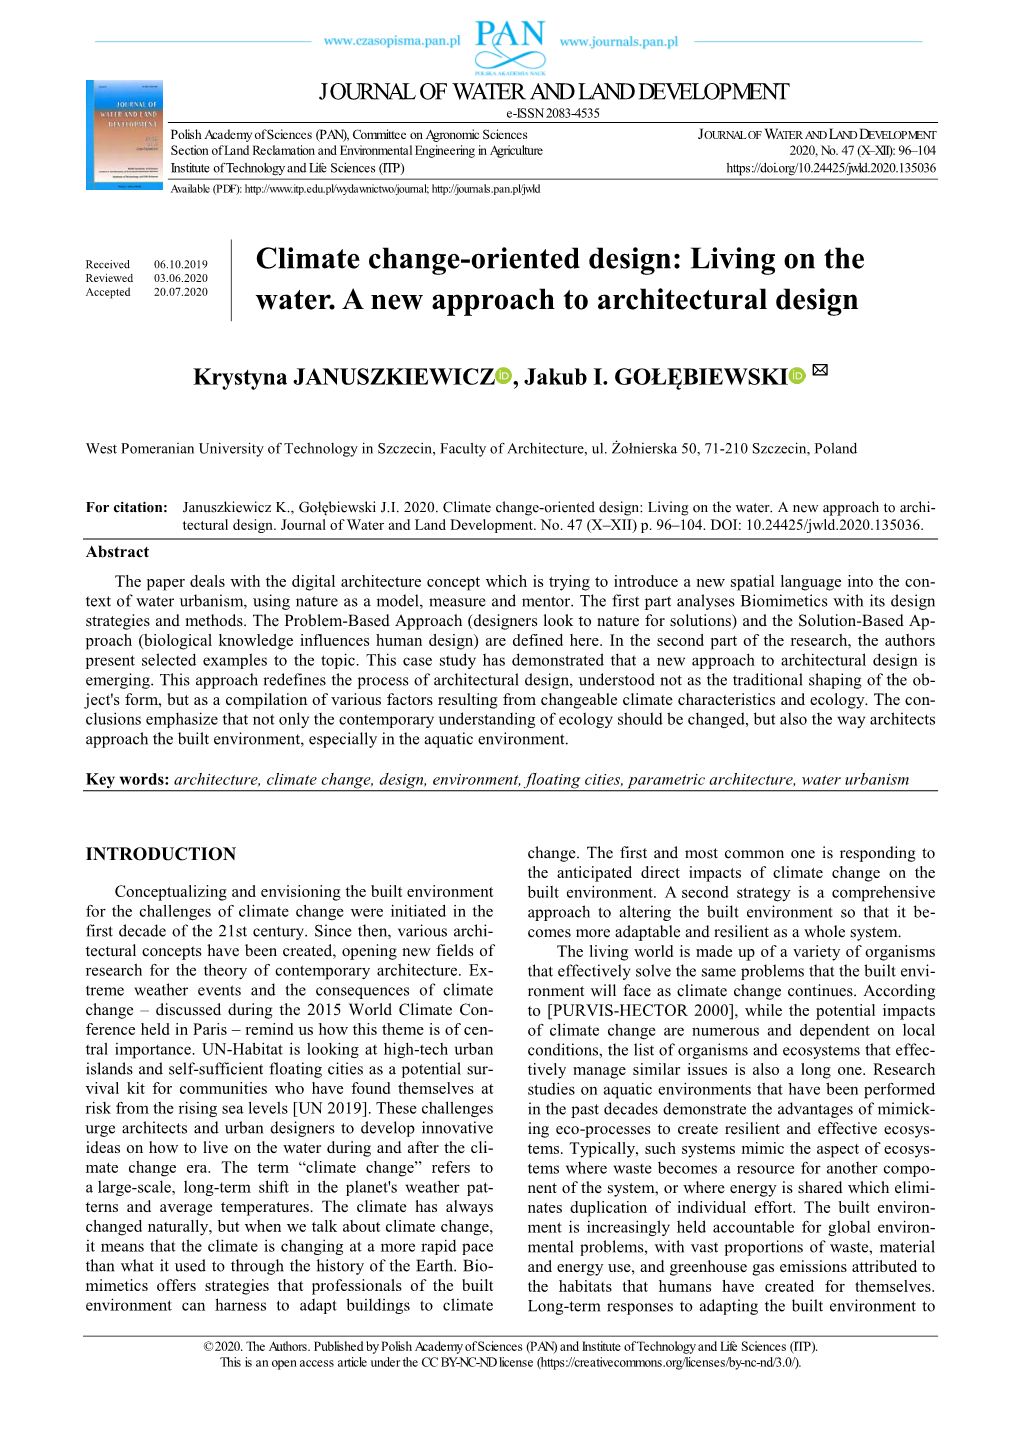 Climate Change-Oriented Design: Living on the Reviewed 03.06.2020 Accepted 20.07.2020 Water